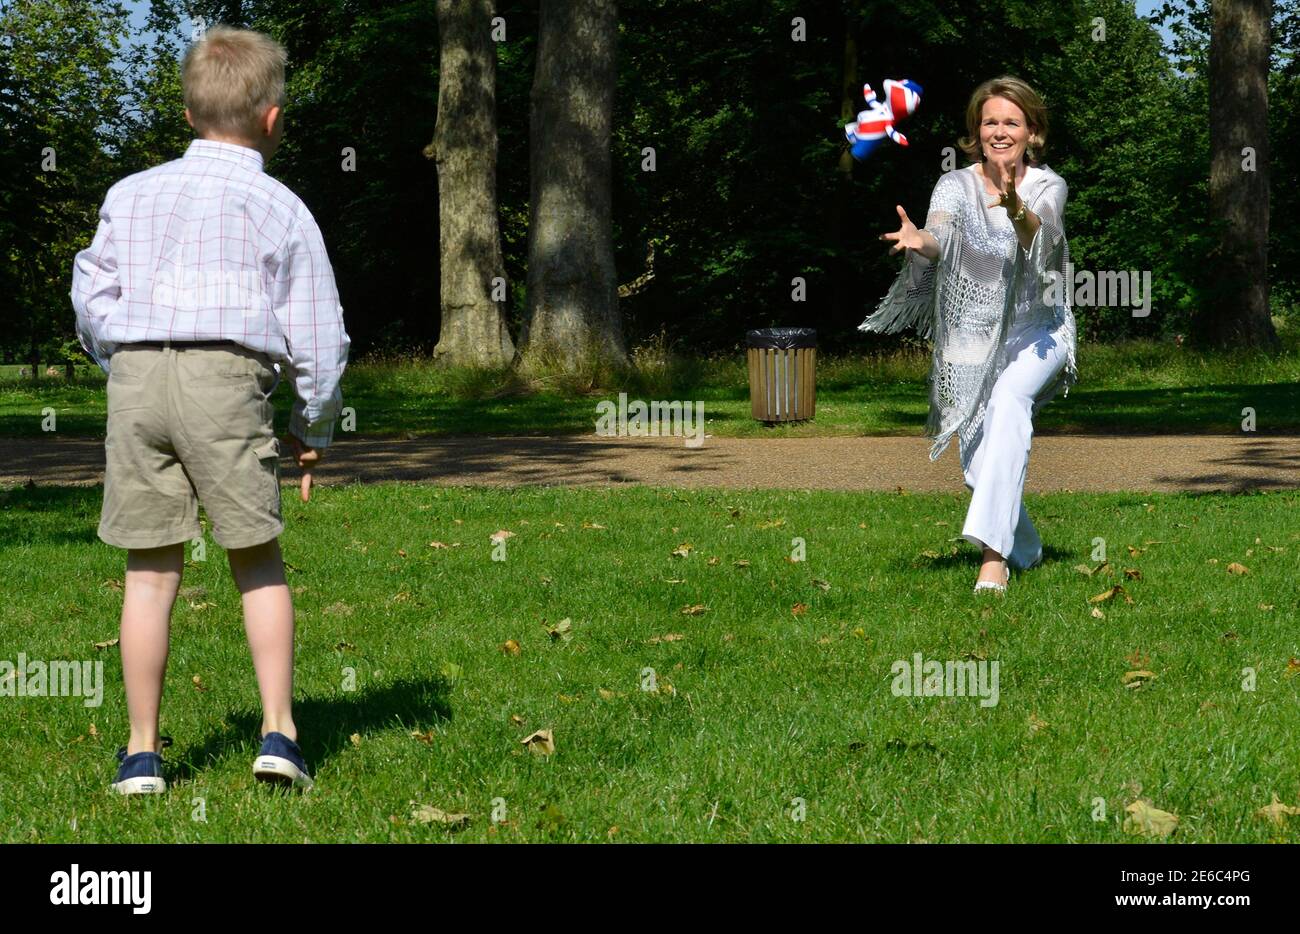 Belgium's Crown Princess Mathilde (R) and Prince Emmanuel (L) play in a park while visiting central London ahead of the London 2012 Olympic Games July 26, 2012. Picture taken on July 26, 2012.                    REUTERS/Benoit Doppagne/Pool   (BRITAIN  - Tags: SPORT ROYALS POLITICS SPORT OLYMPICS) Stock Photo